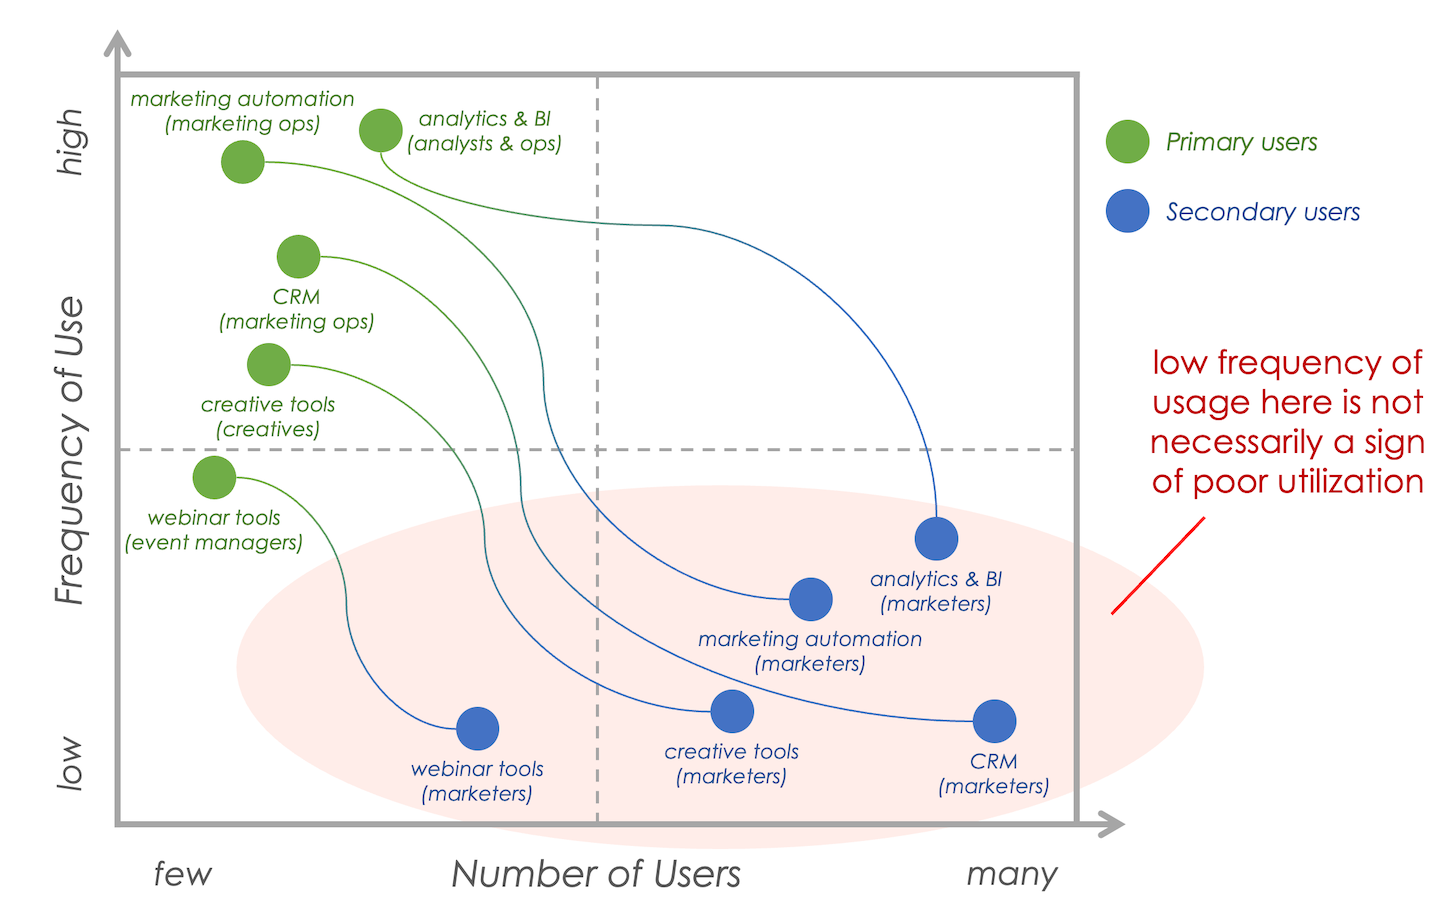 Martech Utilization for Primary vs. Secondary Users